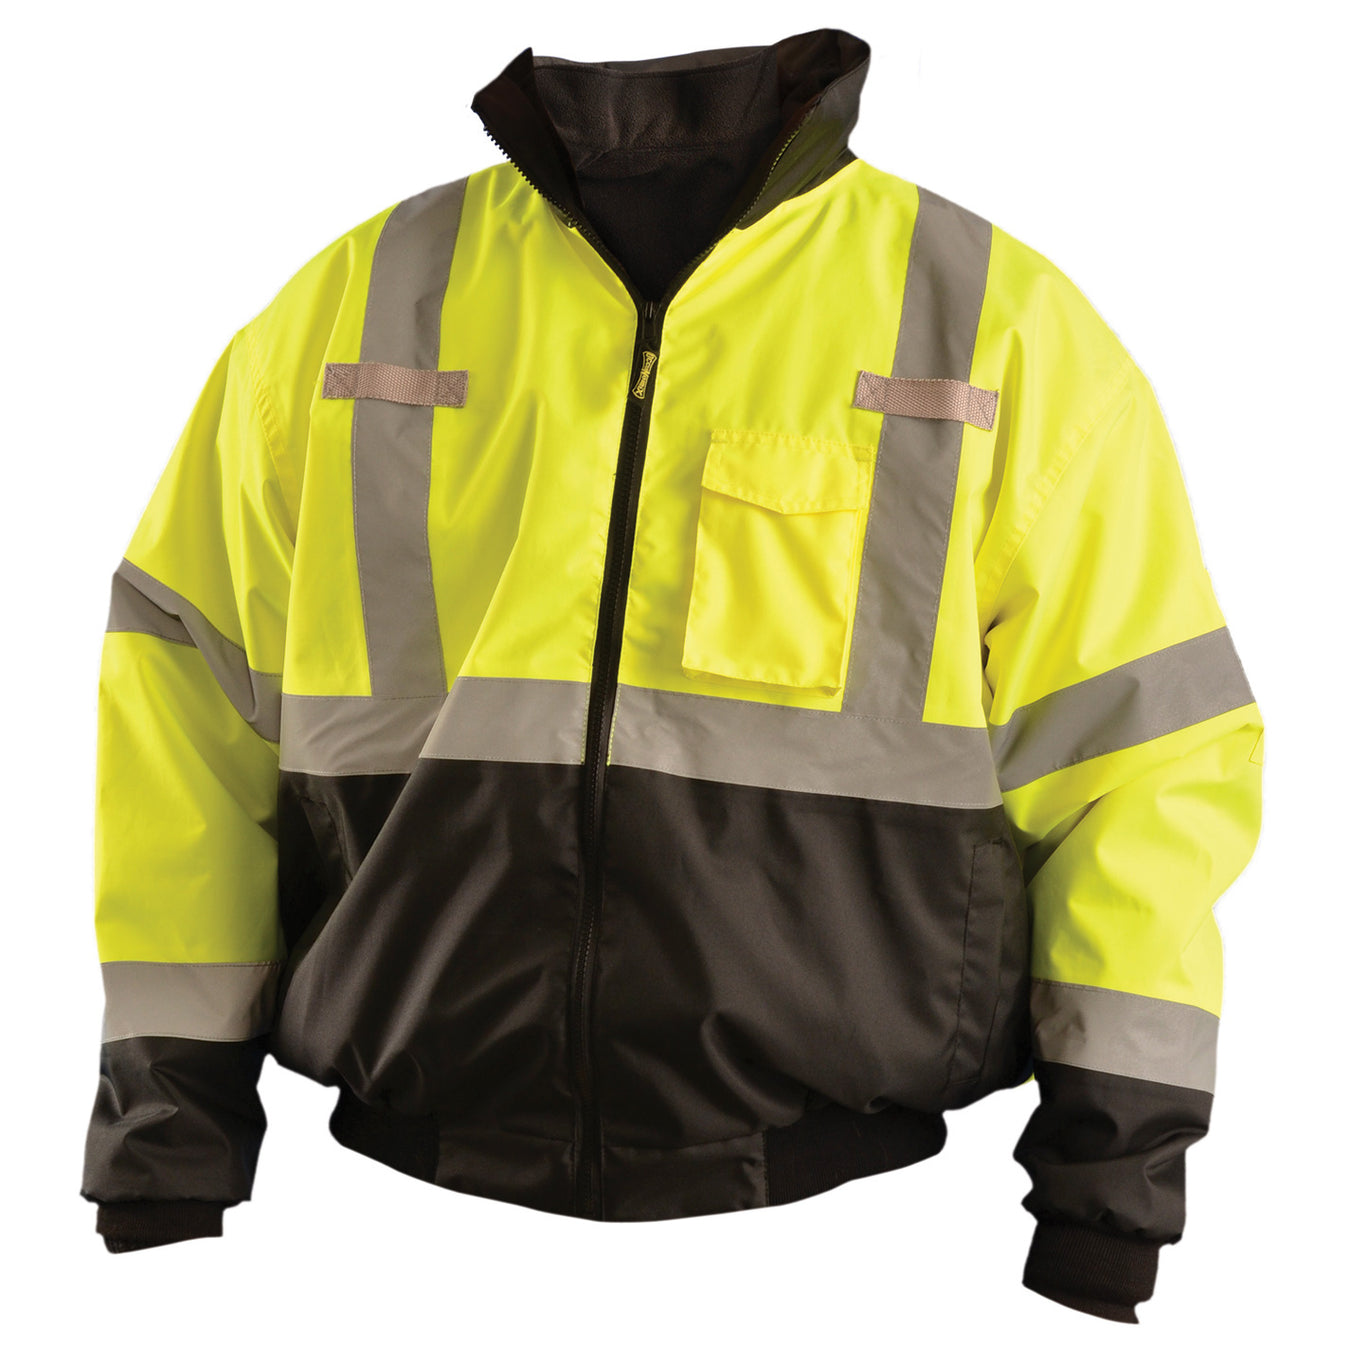 Occunomix® Safety High Visibility Jackets